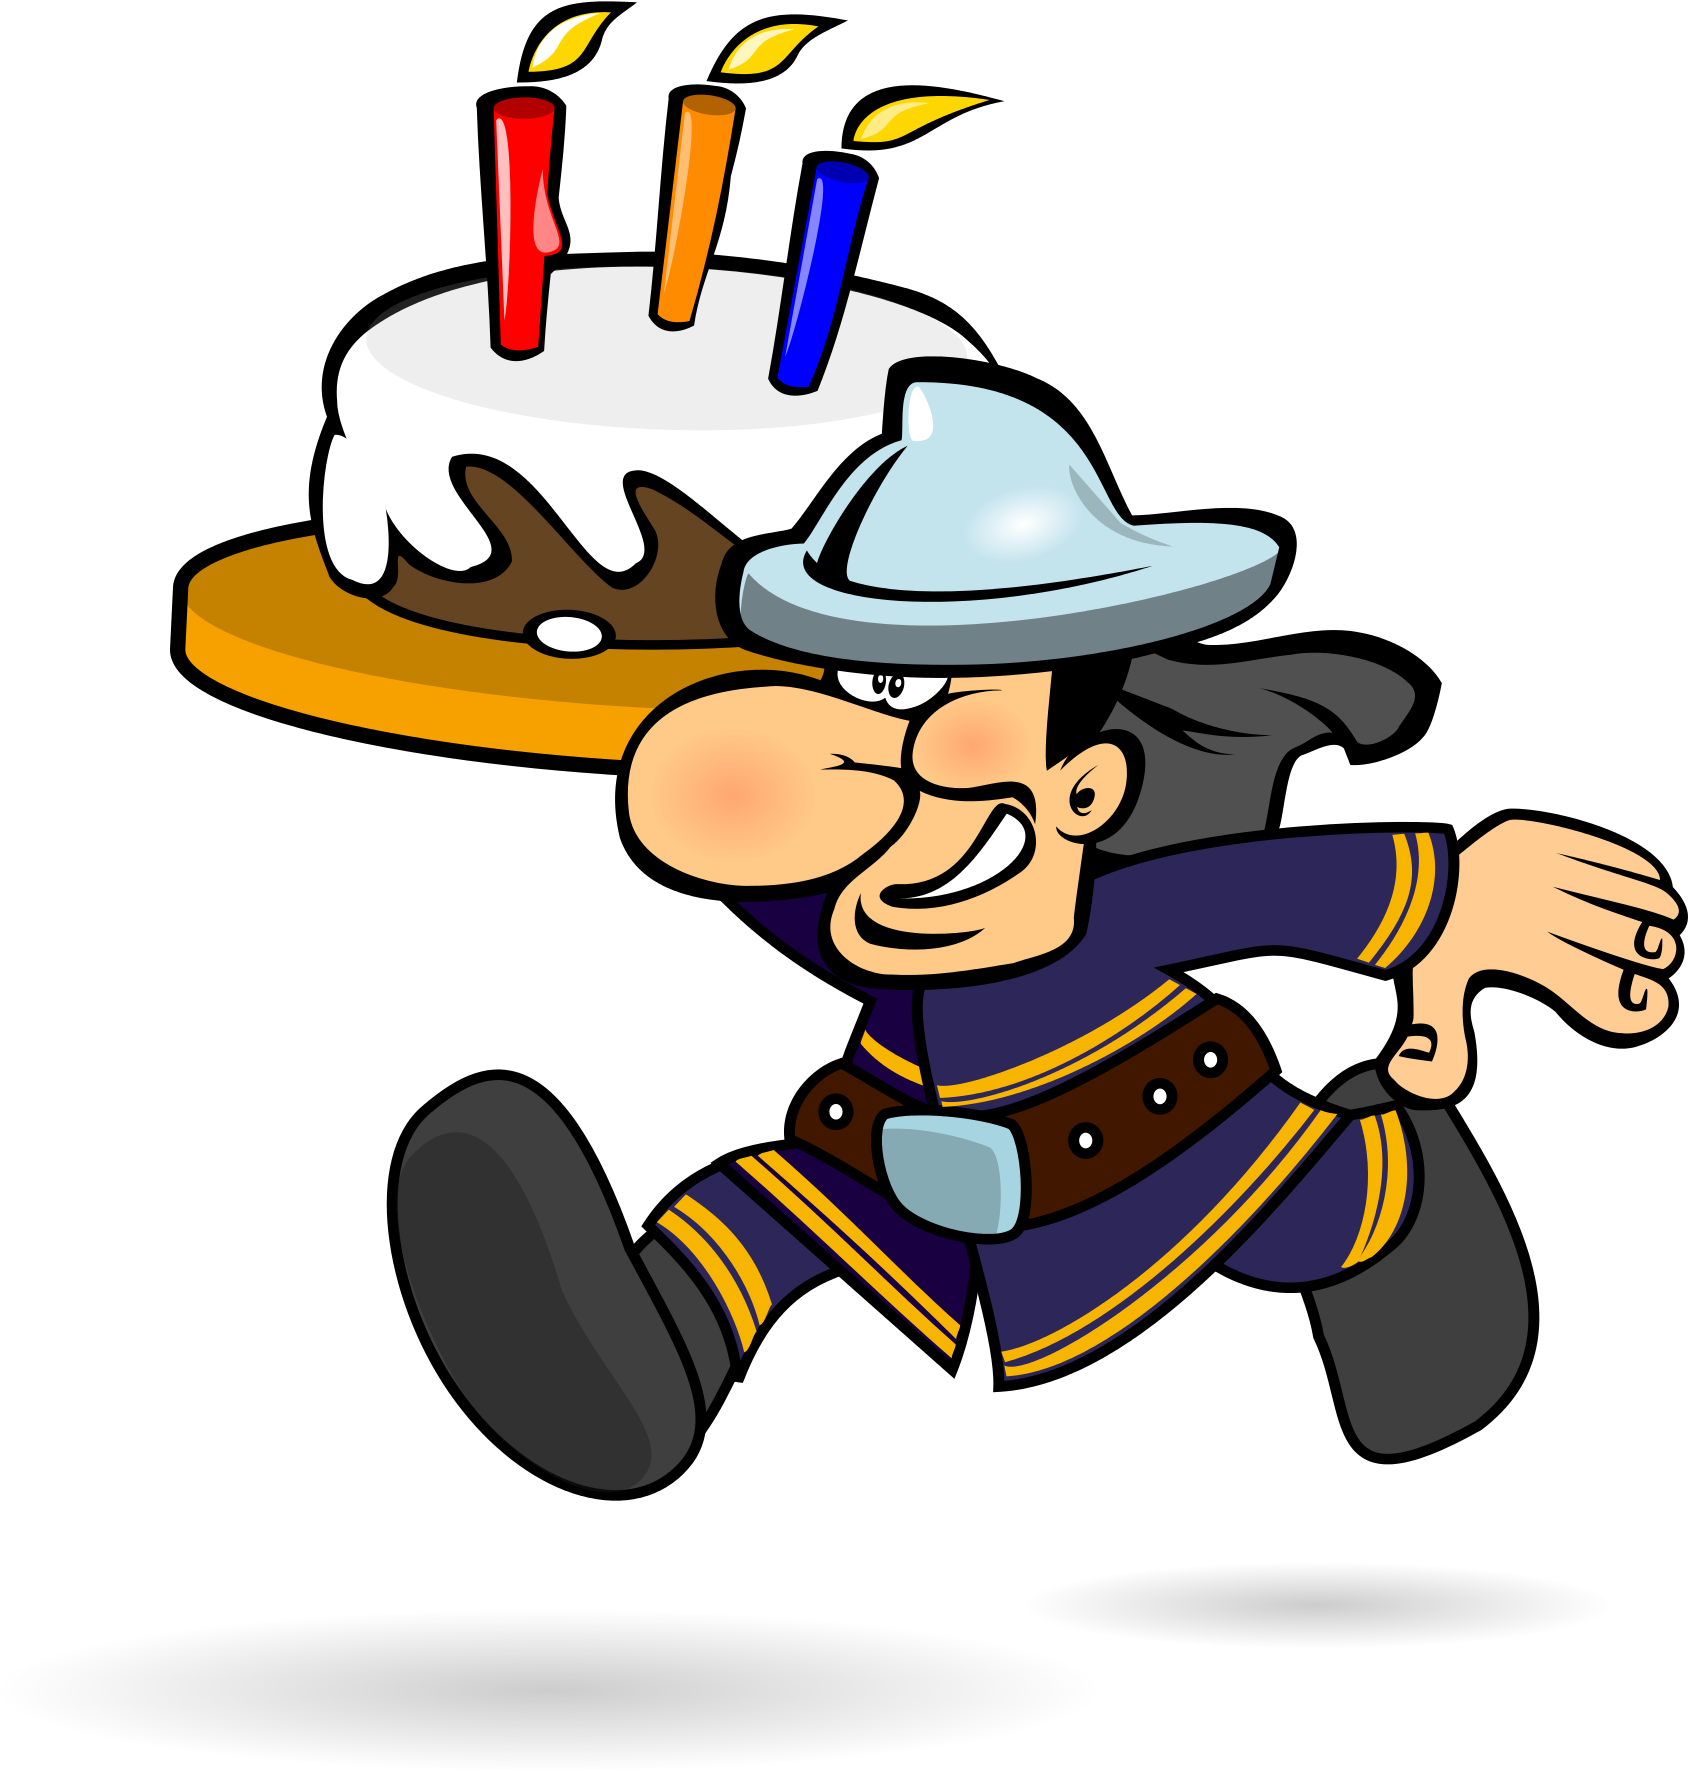 Firefighter Cartoon Carrying Birthday Cake PNG